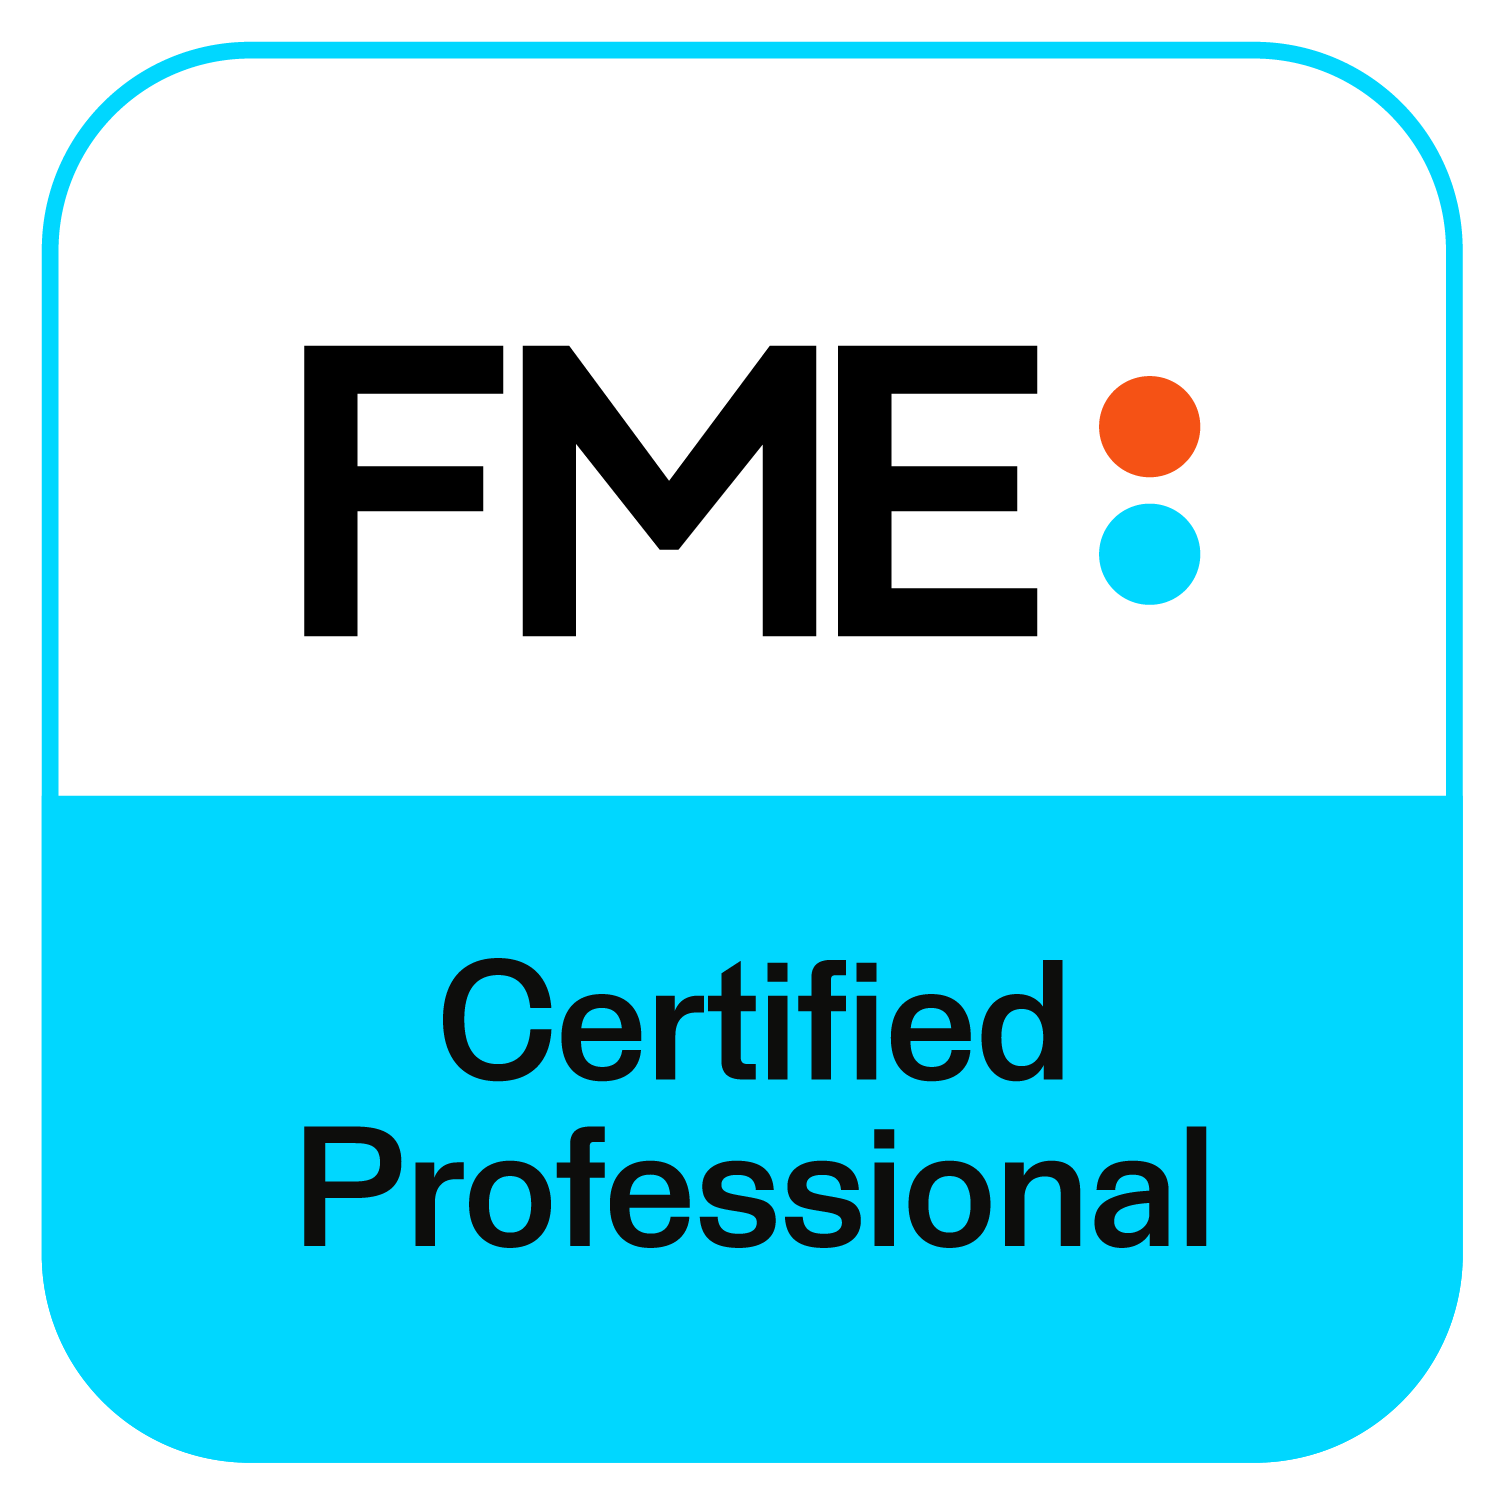 Certified FME Professional